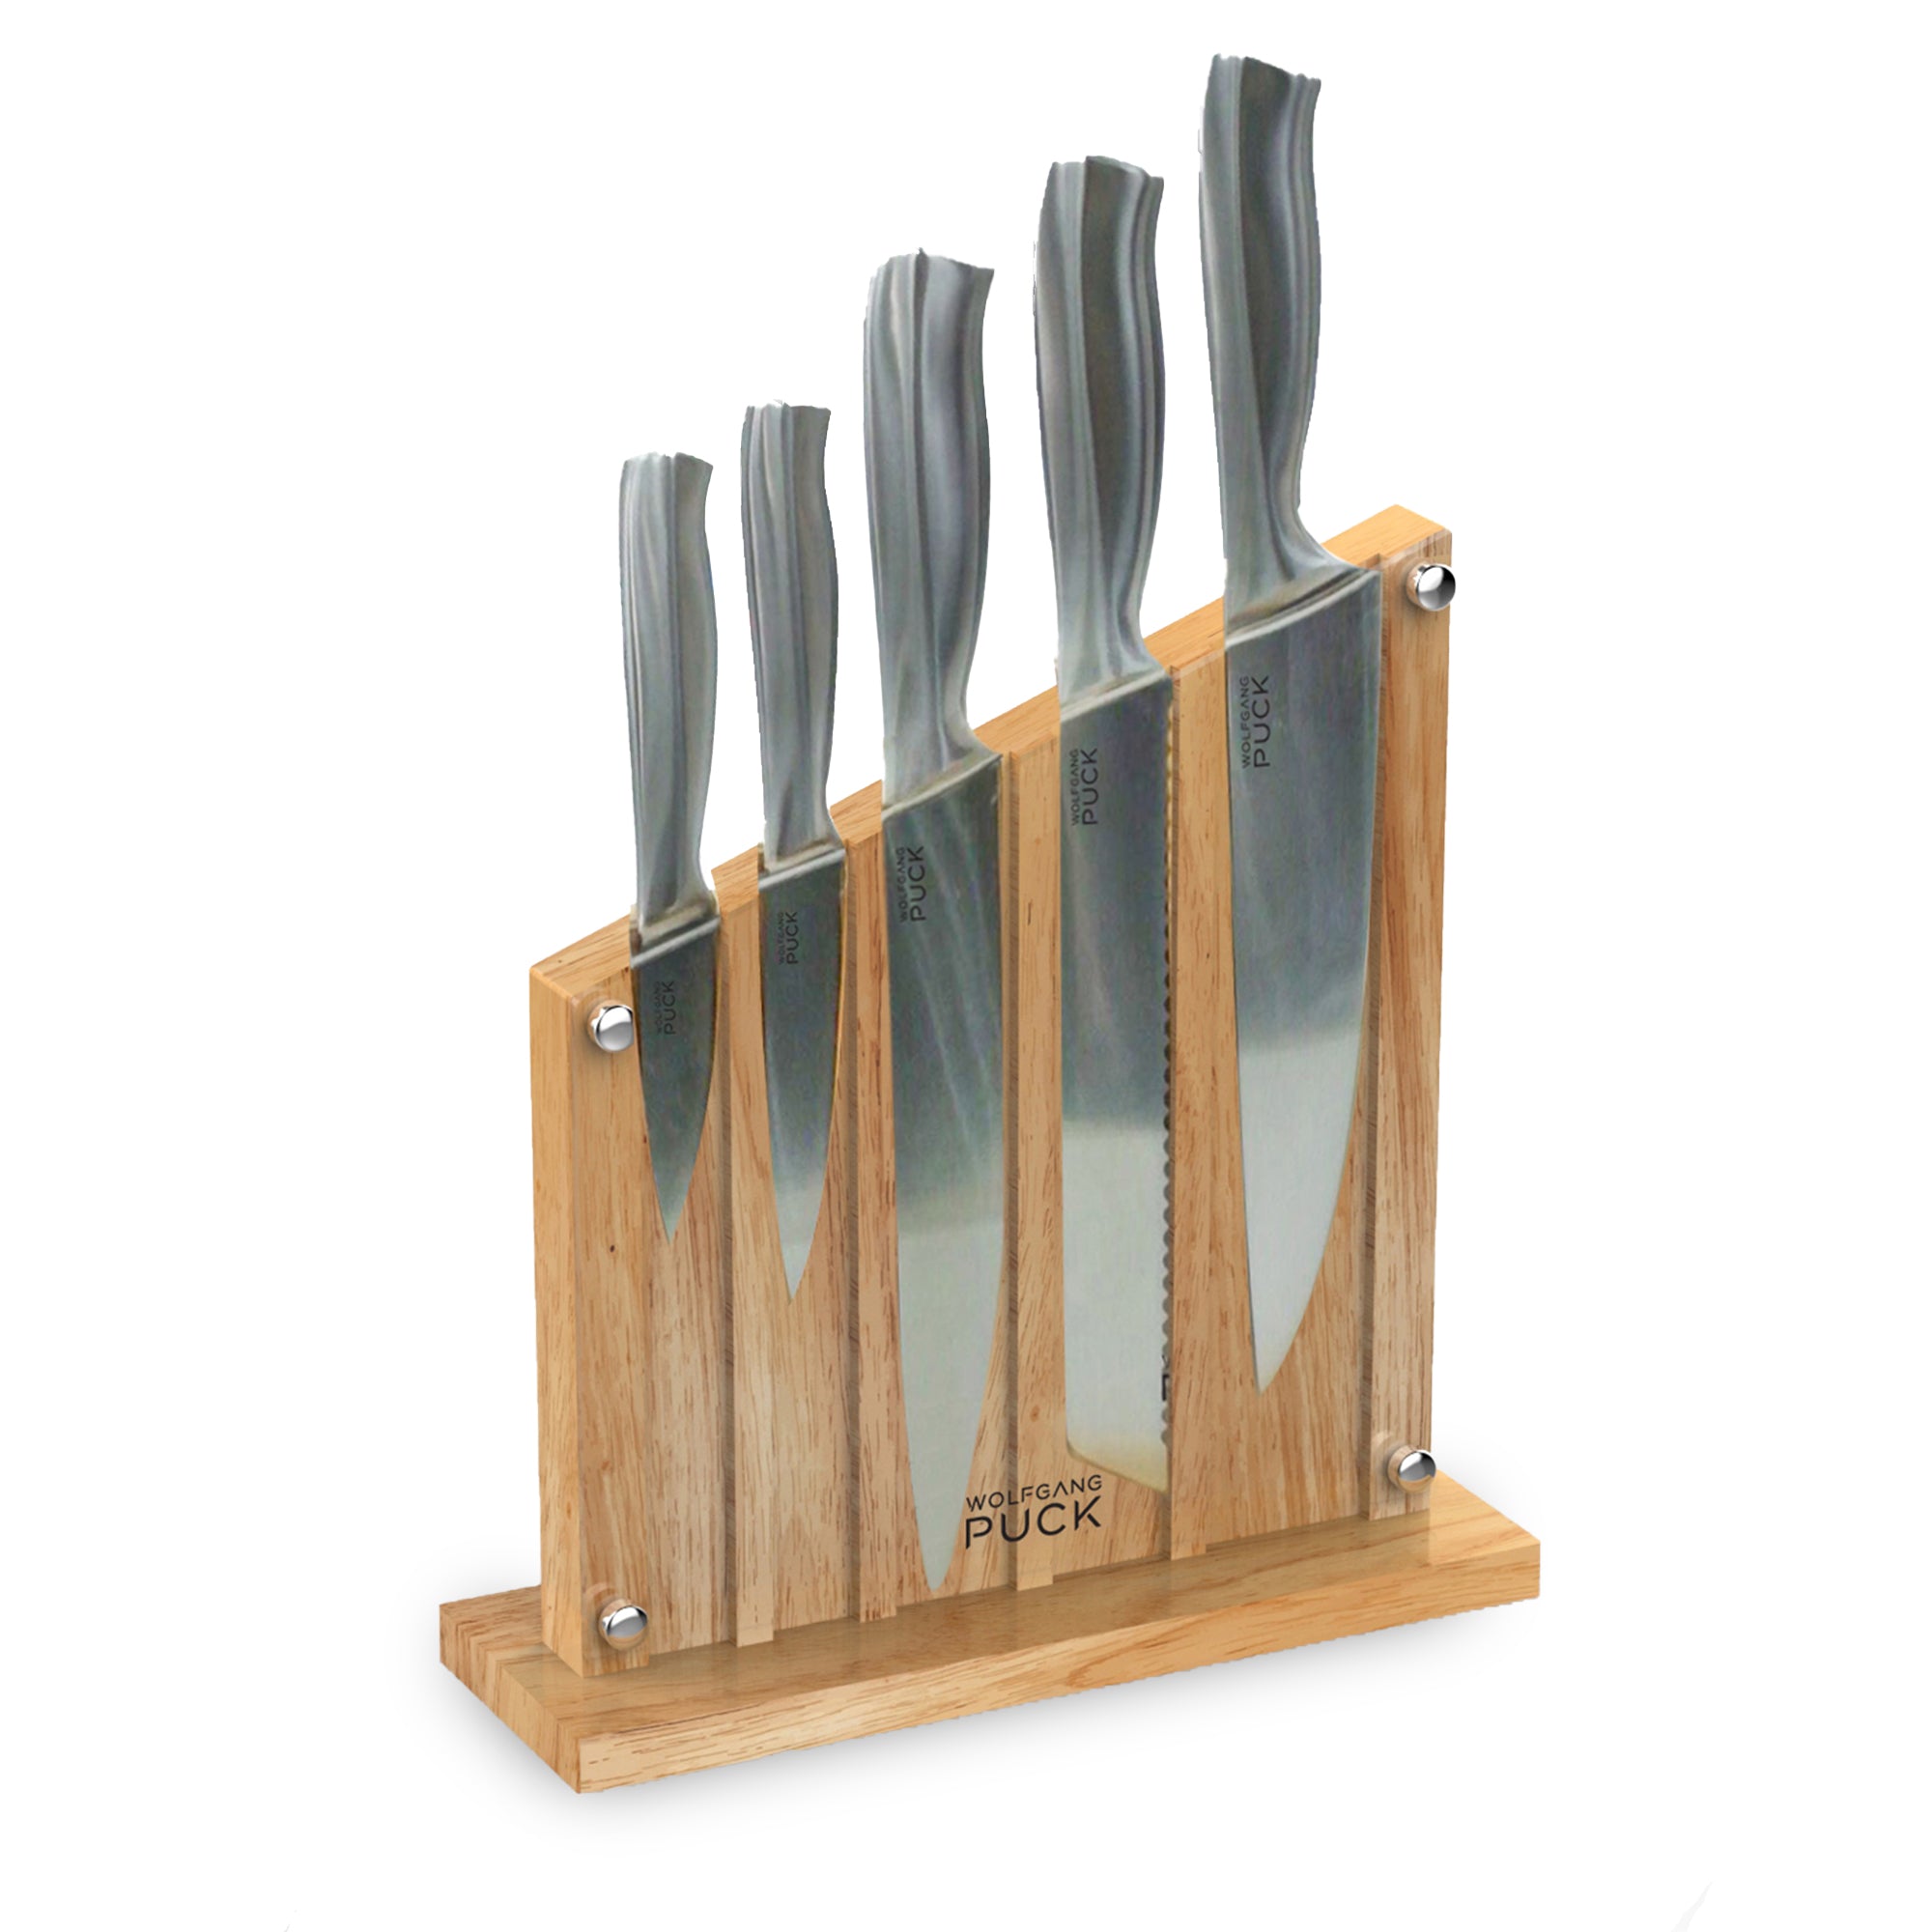 A Visual Guide to Every Single Knife in Your Knife Block